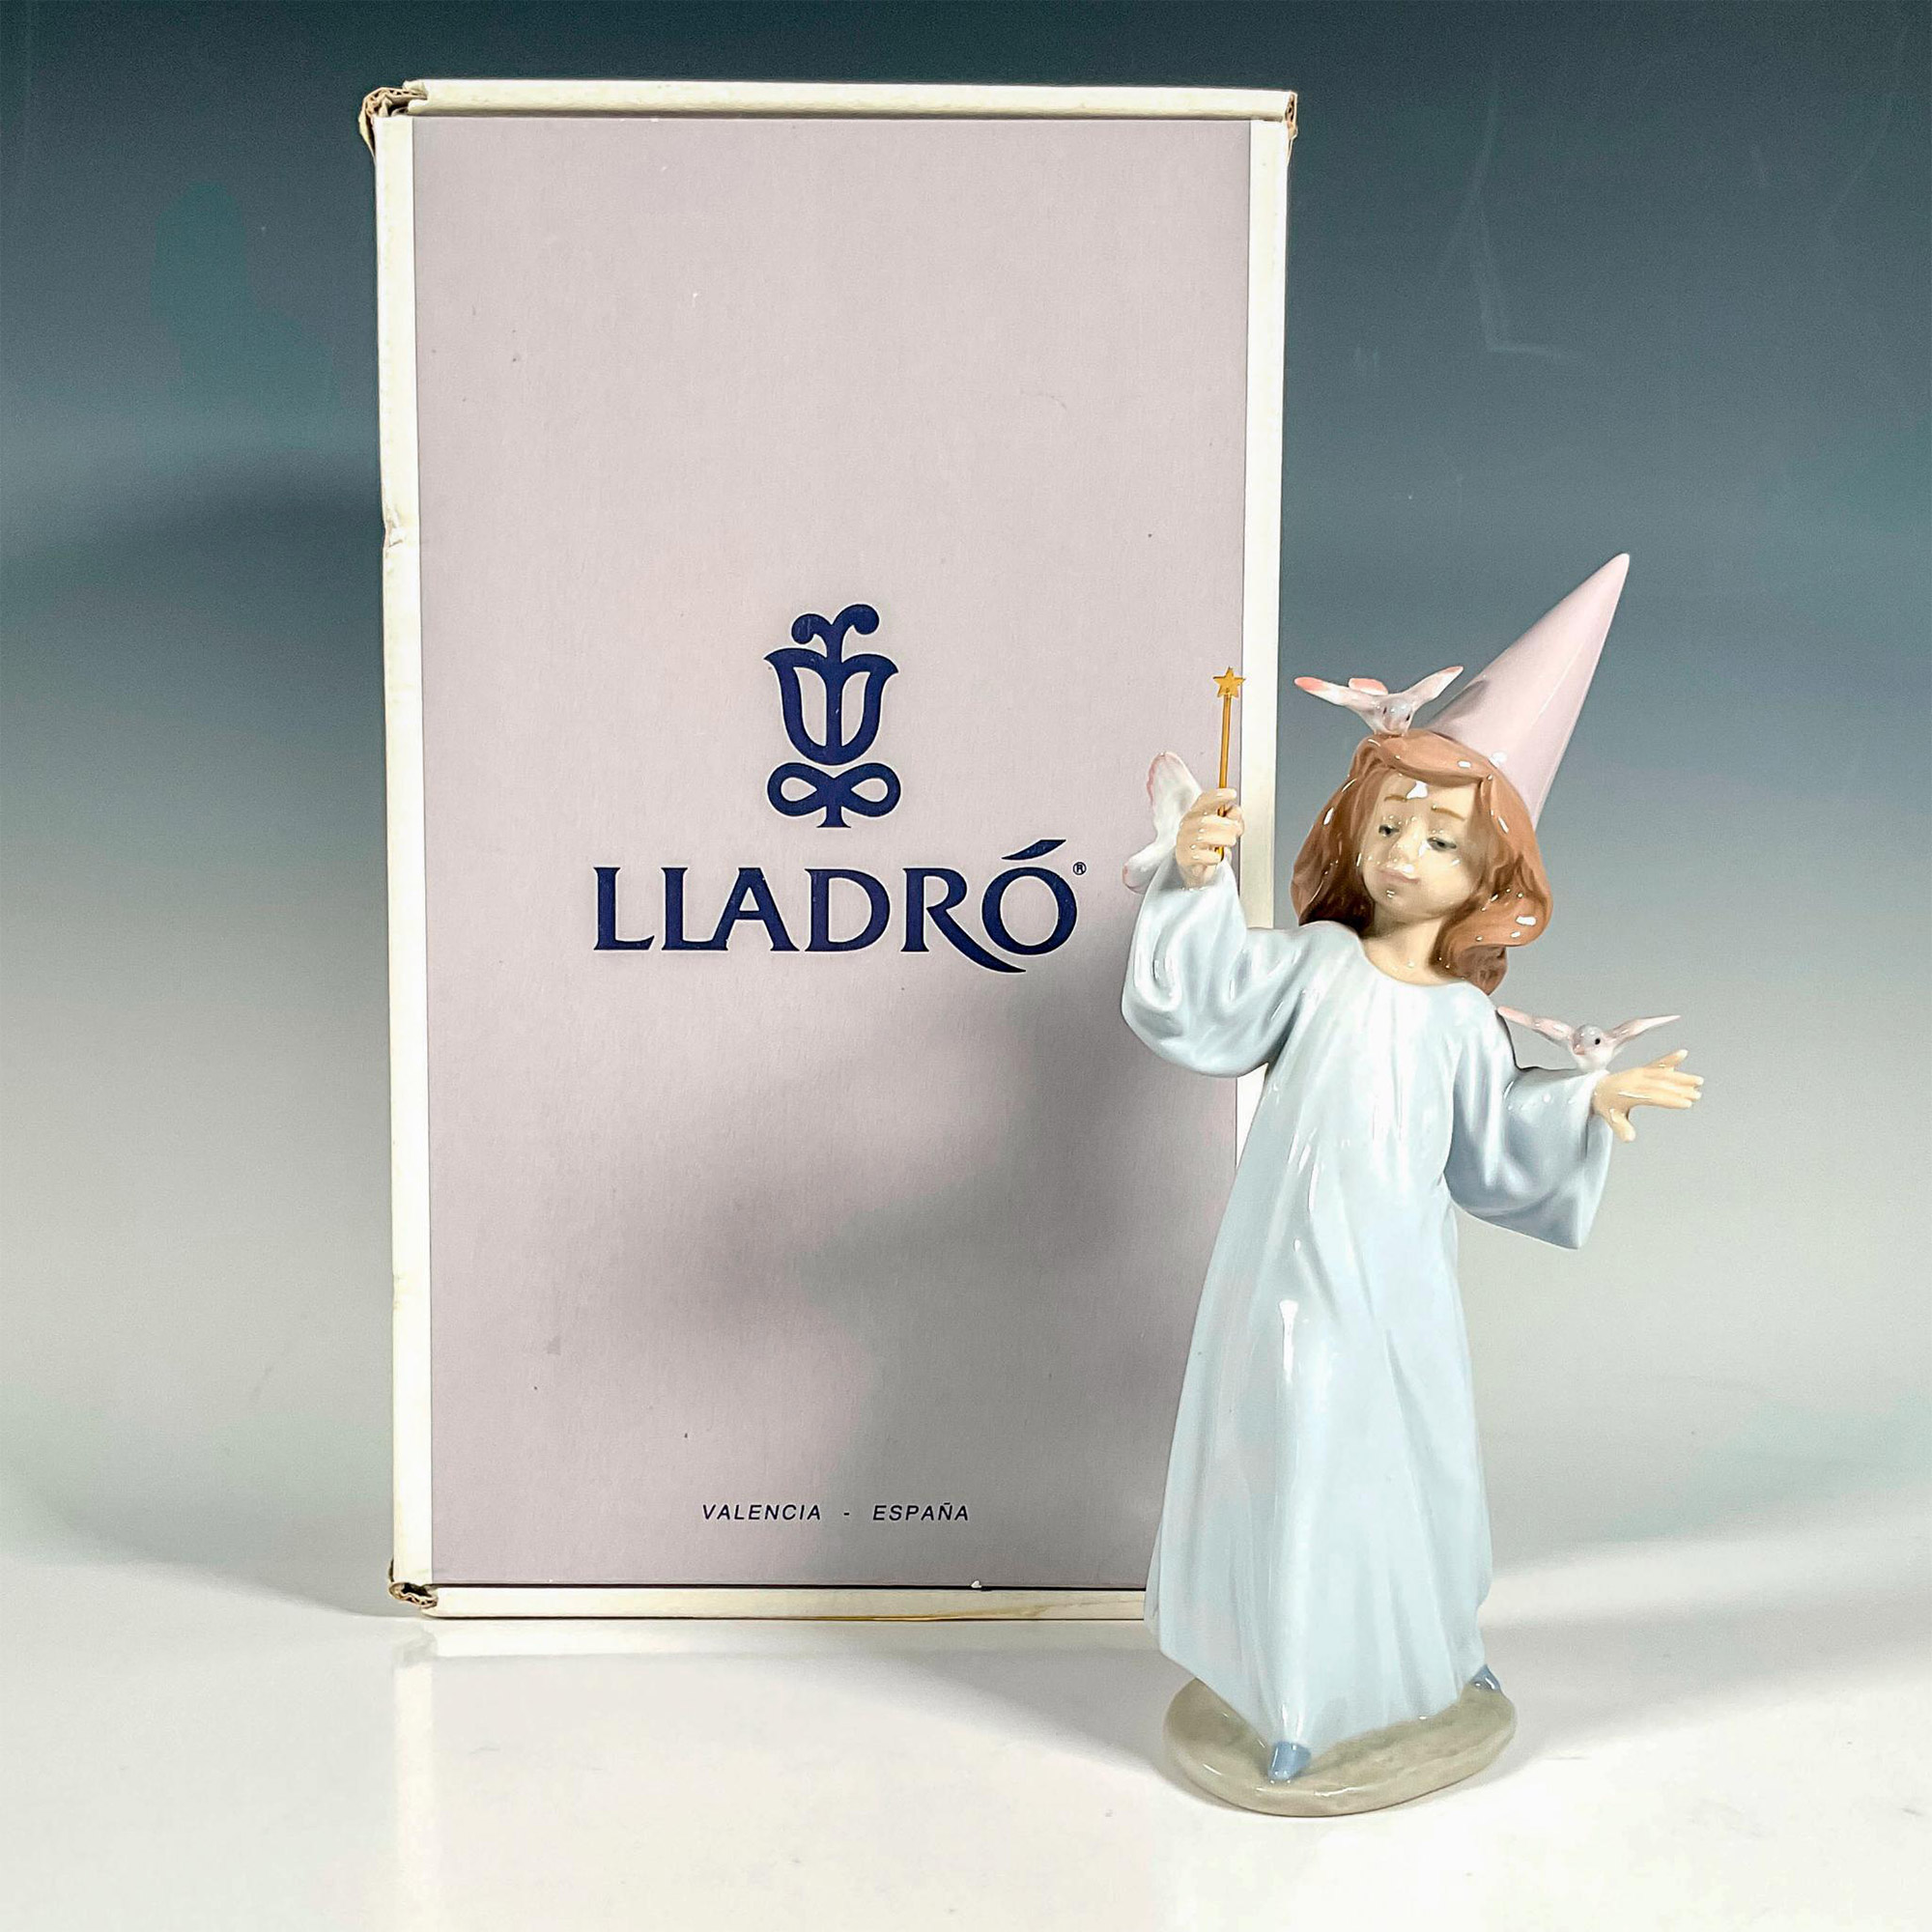 Magical Moment 1006171 - Lladro Porcelain Figurine - Image 4 of 4